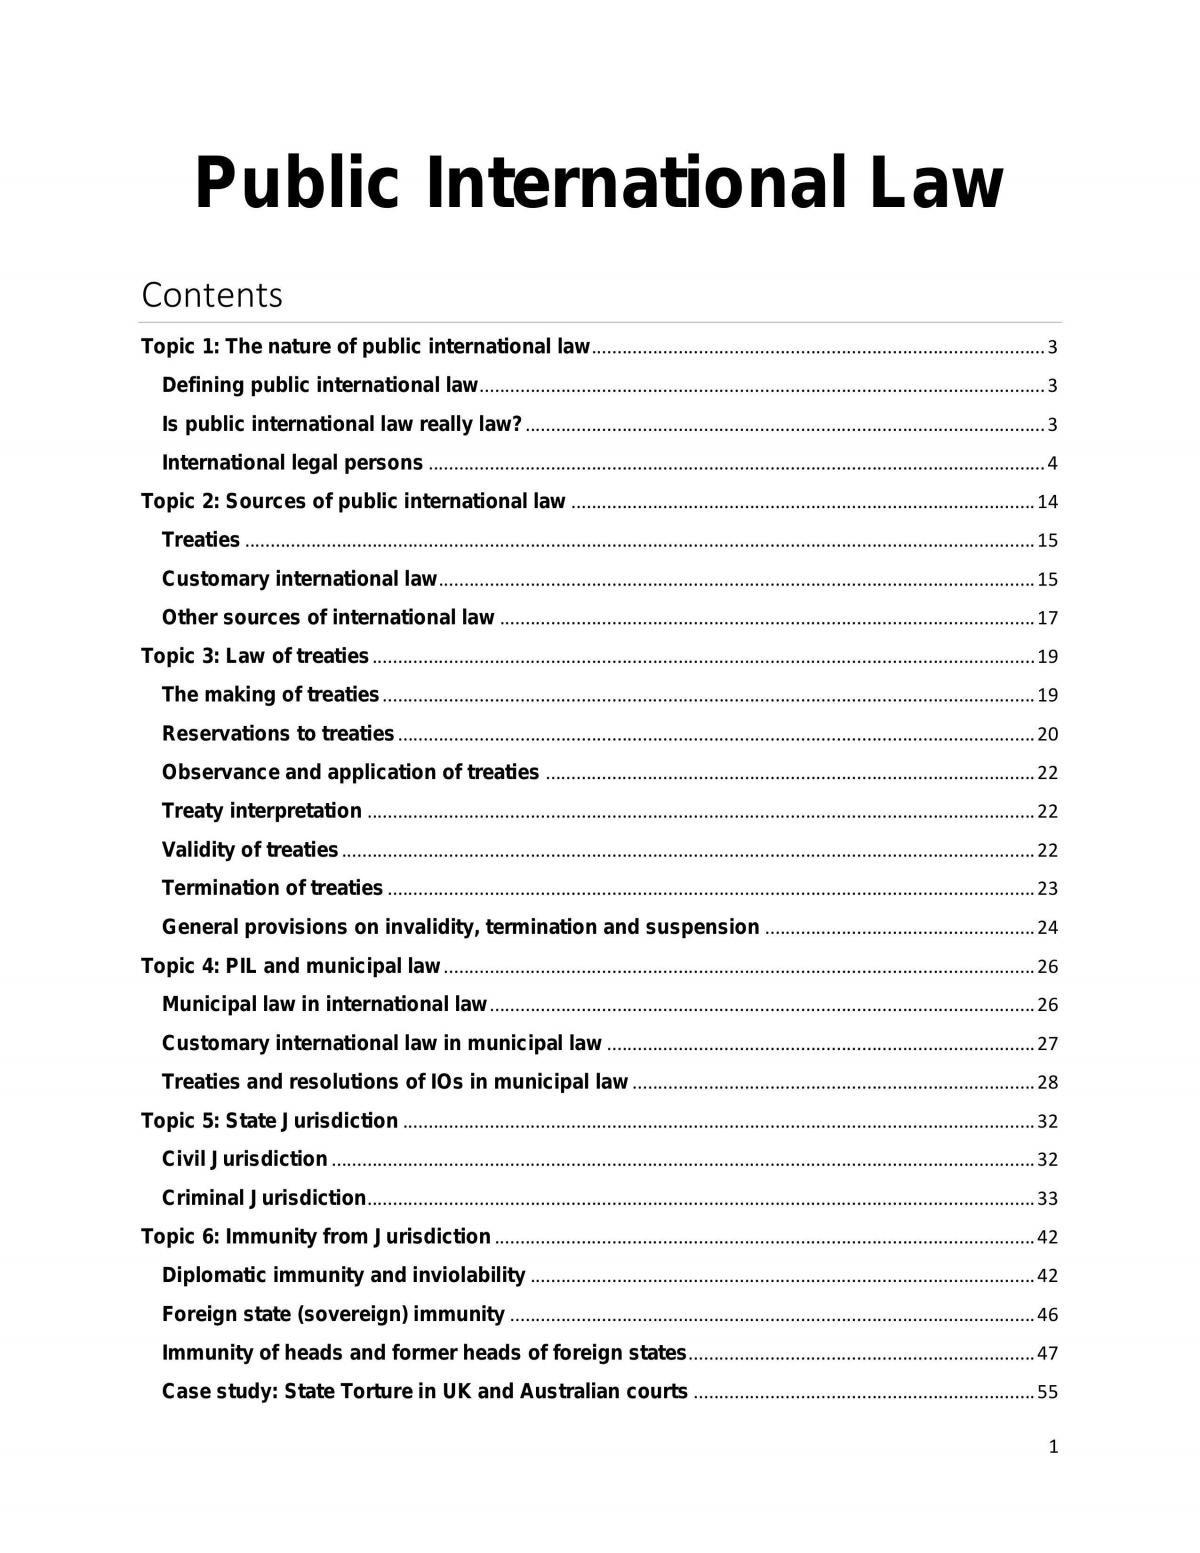 LAWS1023 - Public International Law Notes - Page 1